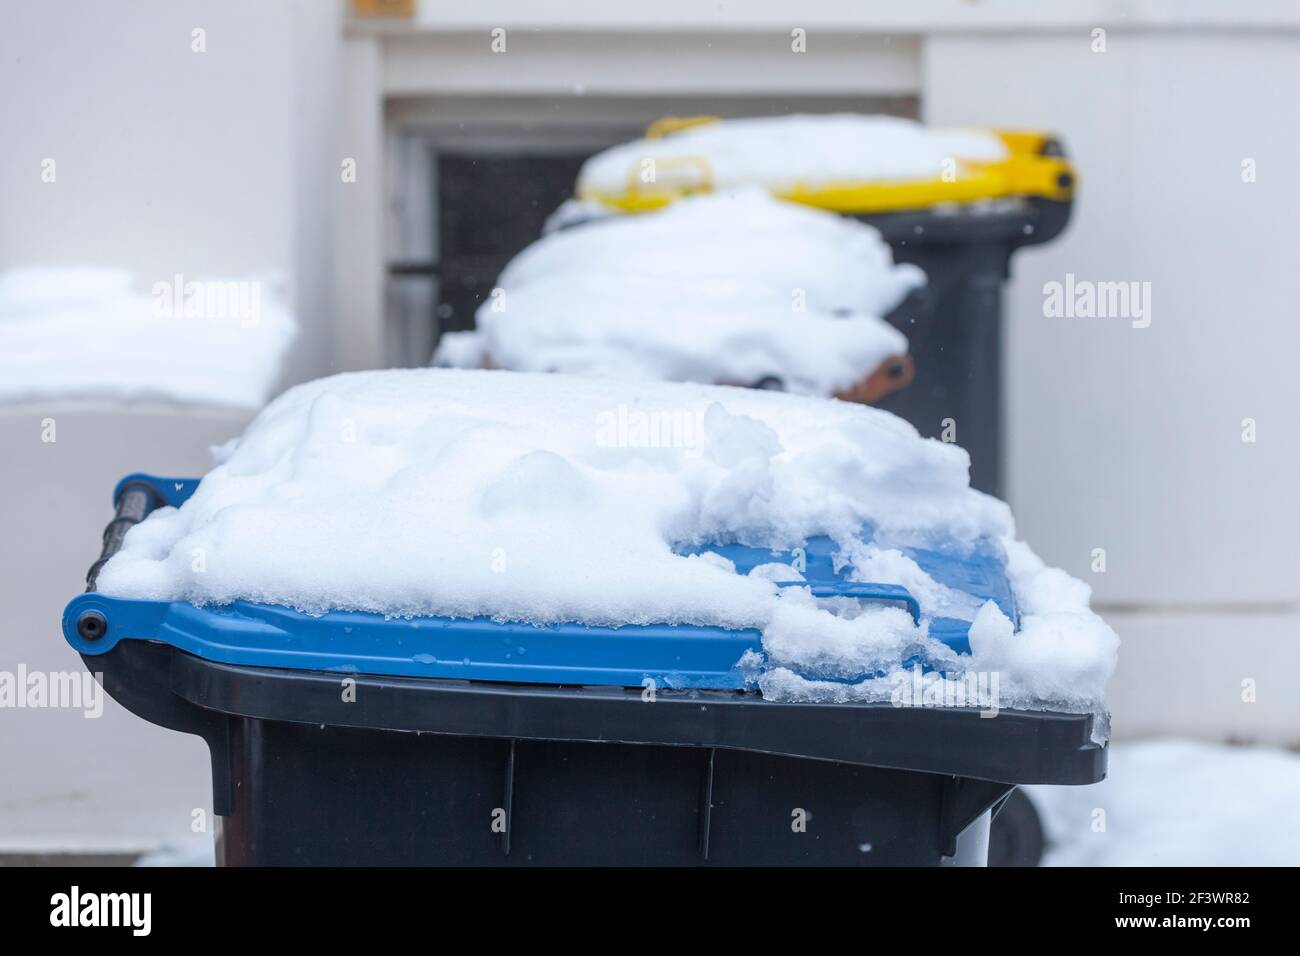 Snowy garbage cans, Germany, Europe Stock Photo